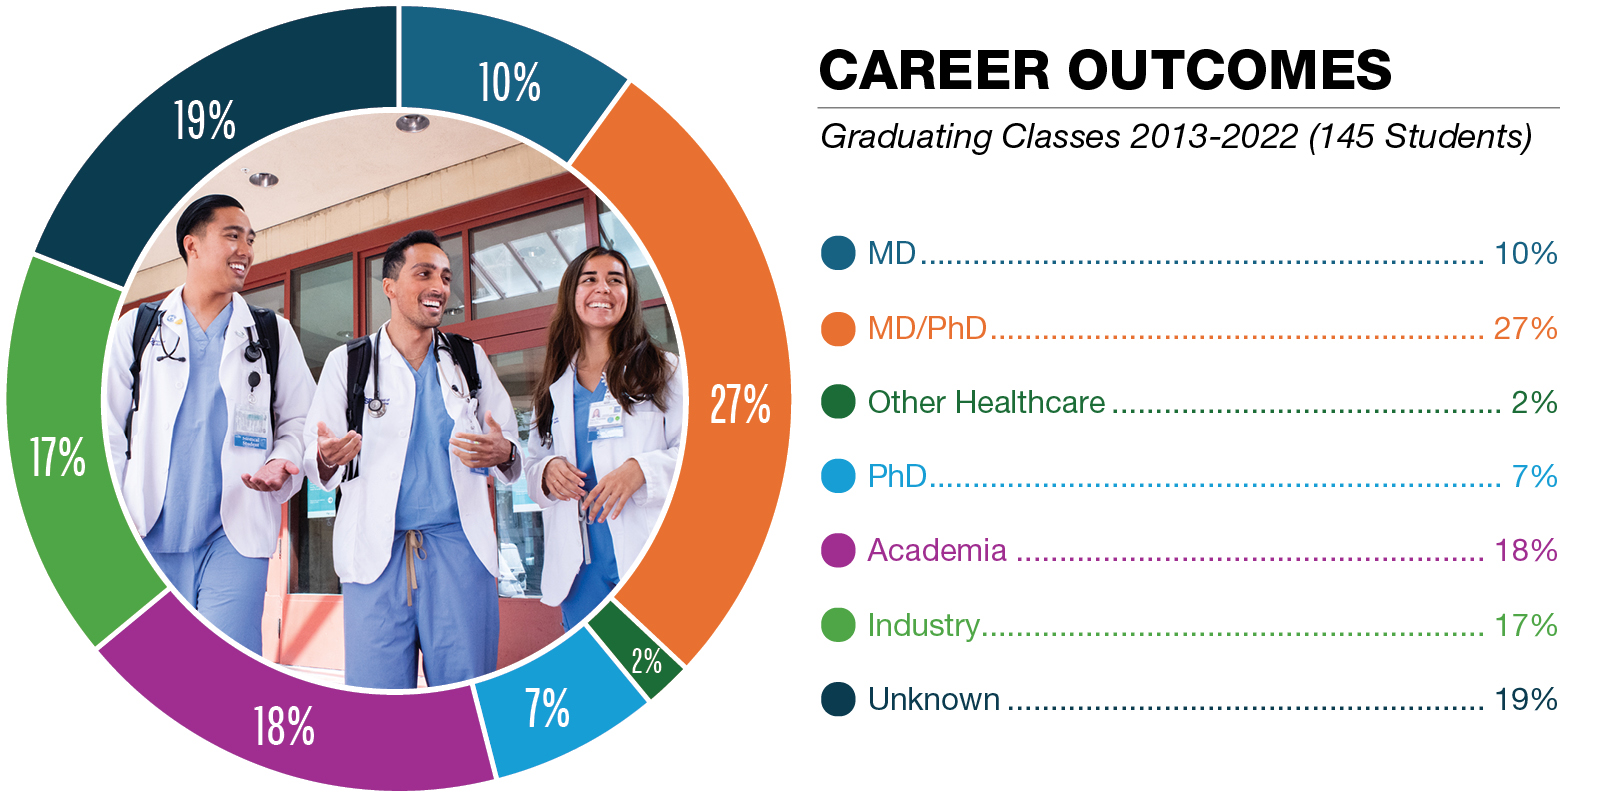 Career Outcomes: Graduating Classes 2013-2022 (145 Students)